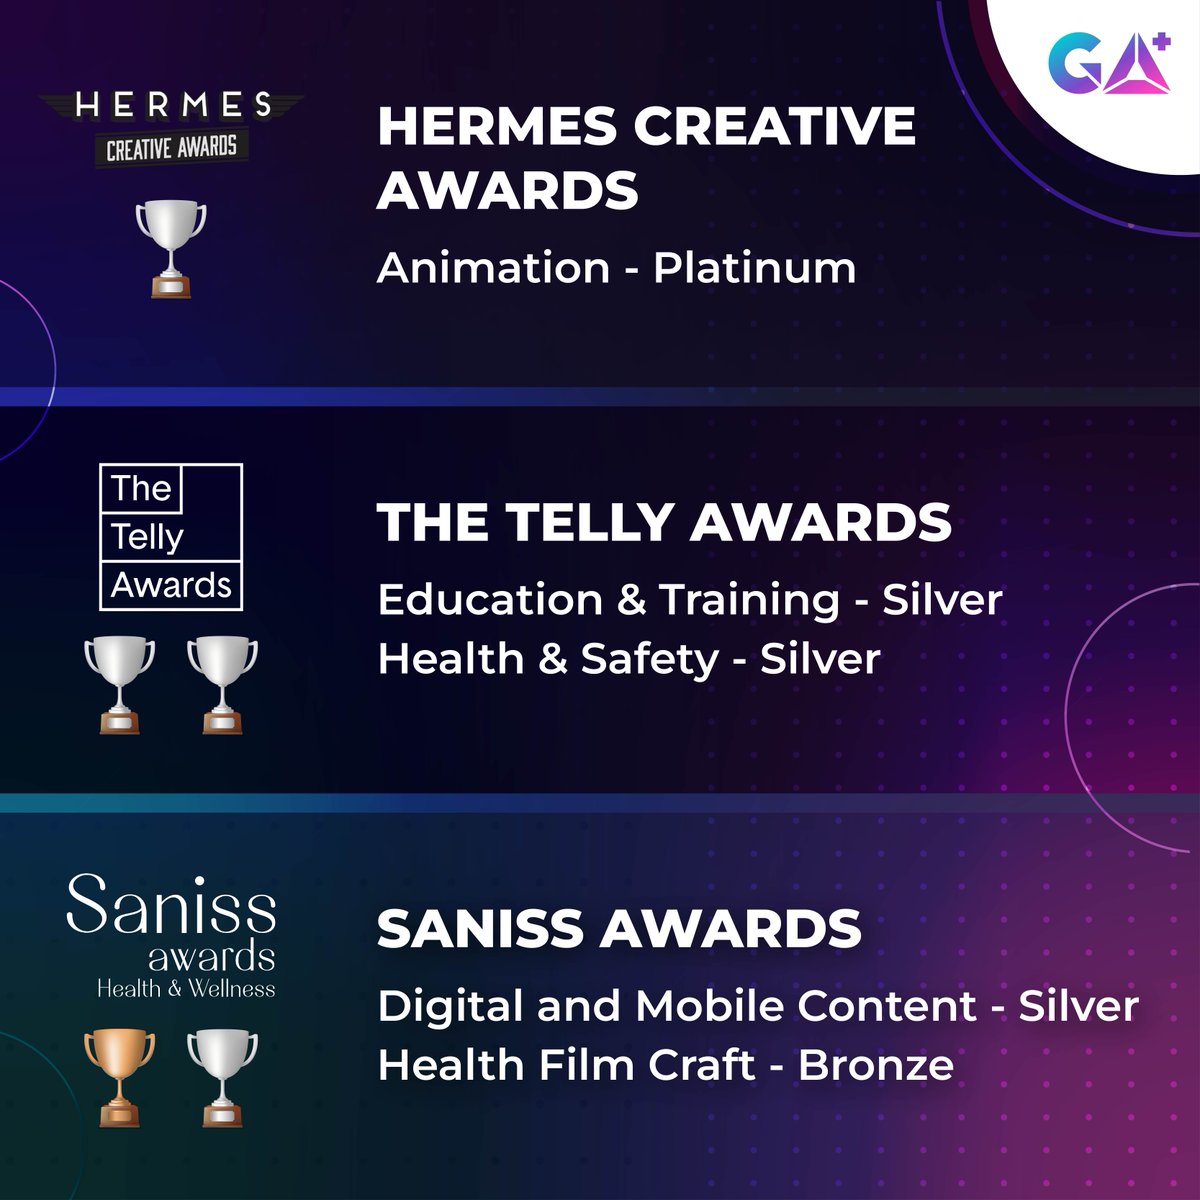 The whole team are delighted to have recently won awards at The Telly Awards, Saniss Awards and the Hermes Creative Awards. It is an honour to be recognised for our work, thank you! 

#MedComms #Healthcare #Health #BrandManagers #MedicalAnimation #Pharma #Biotech #Biotechnology